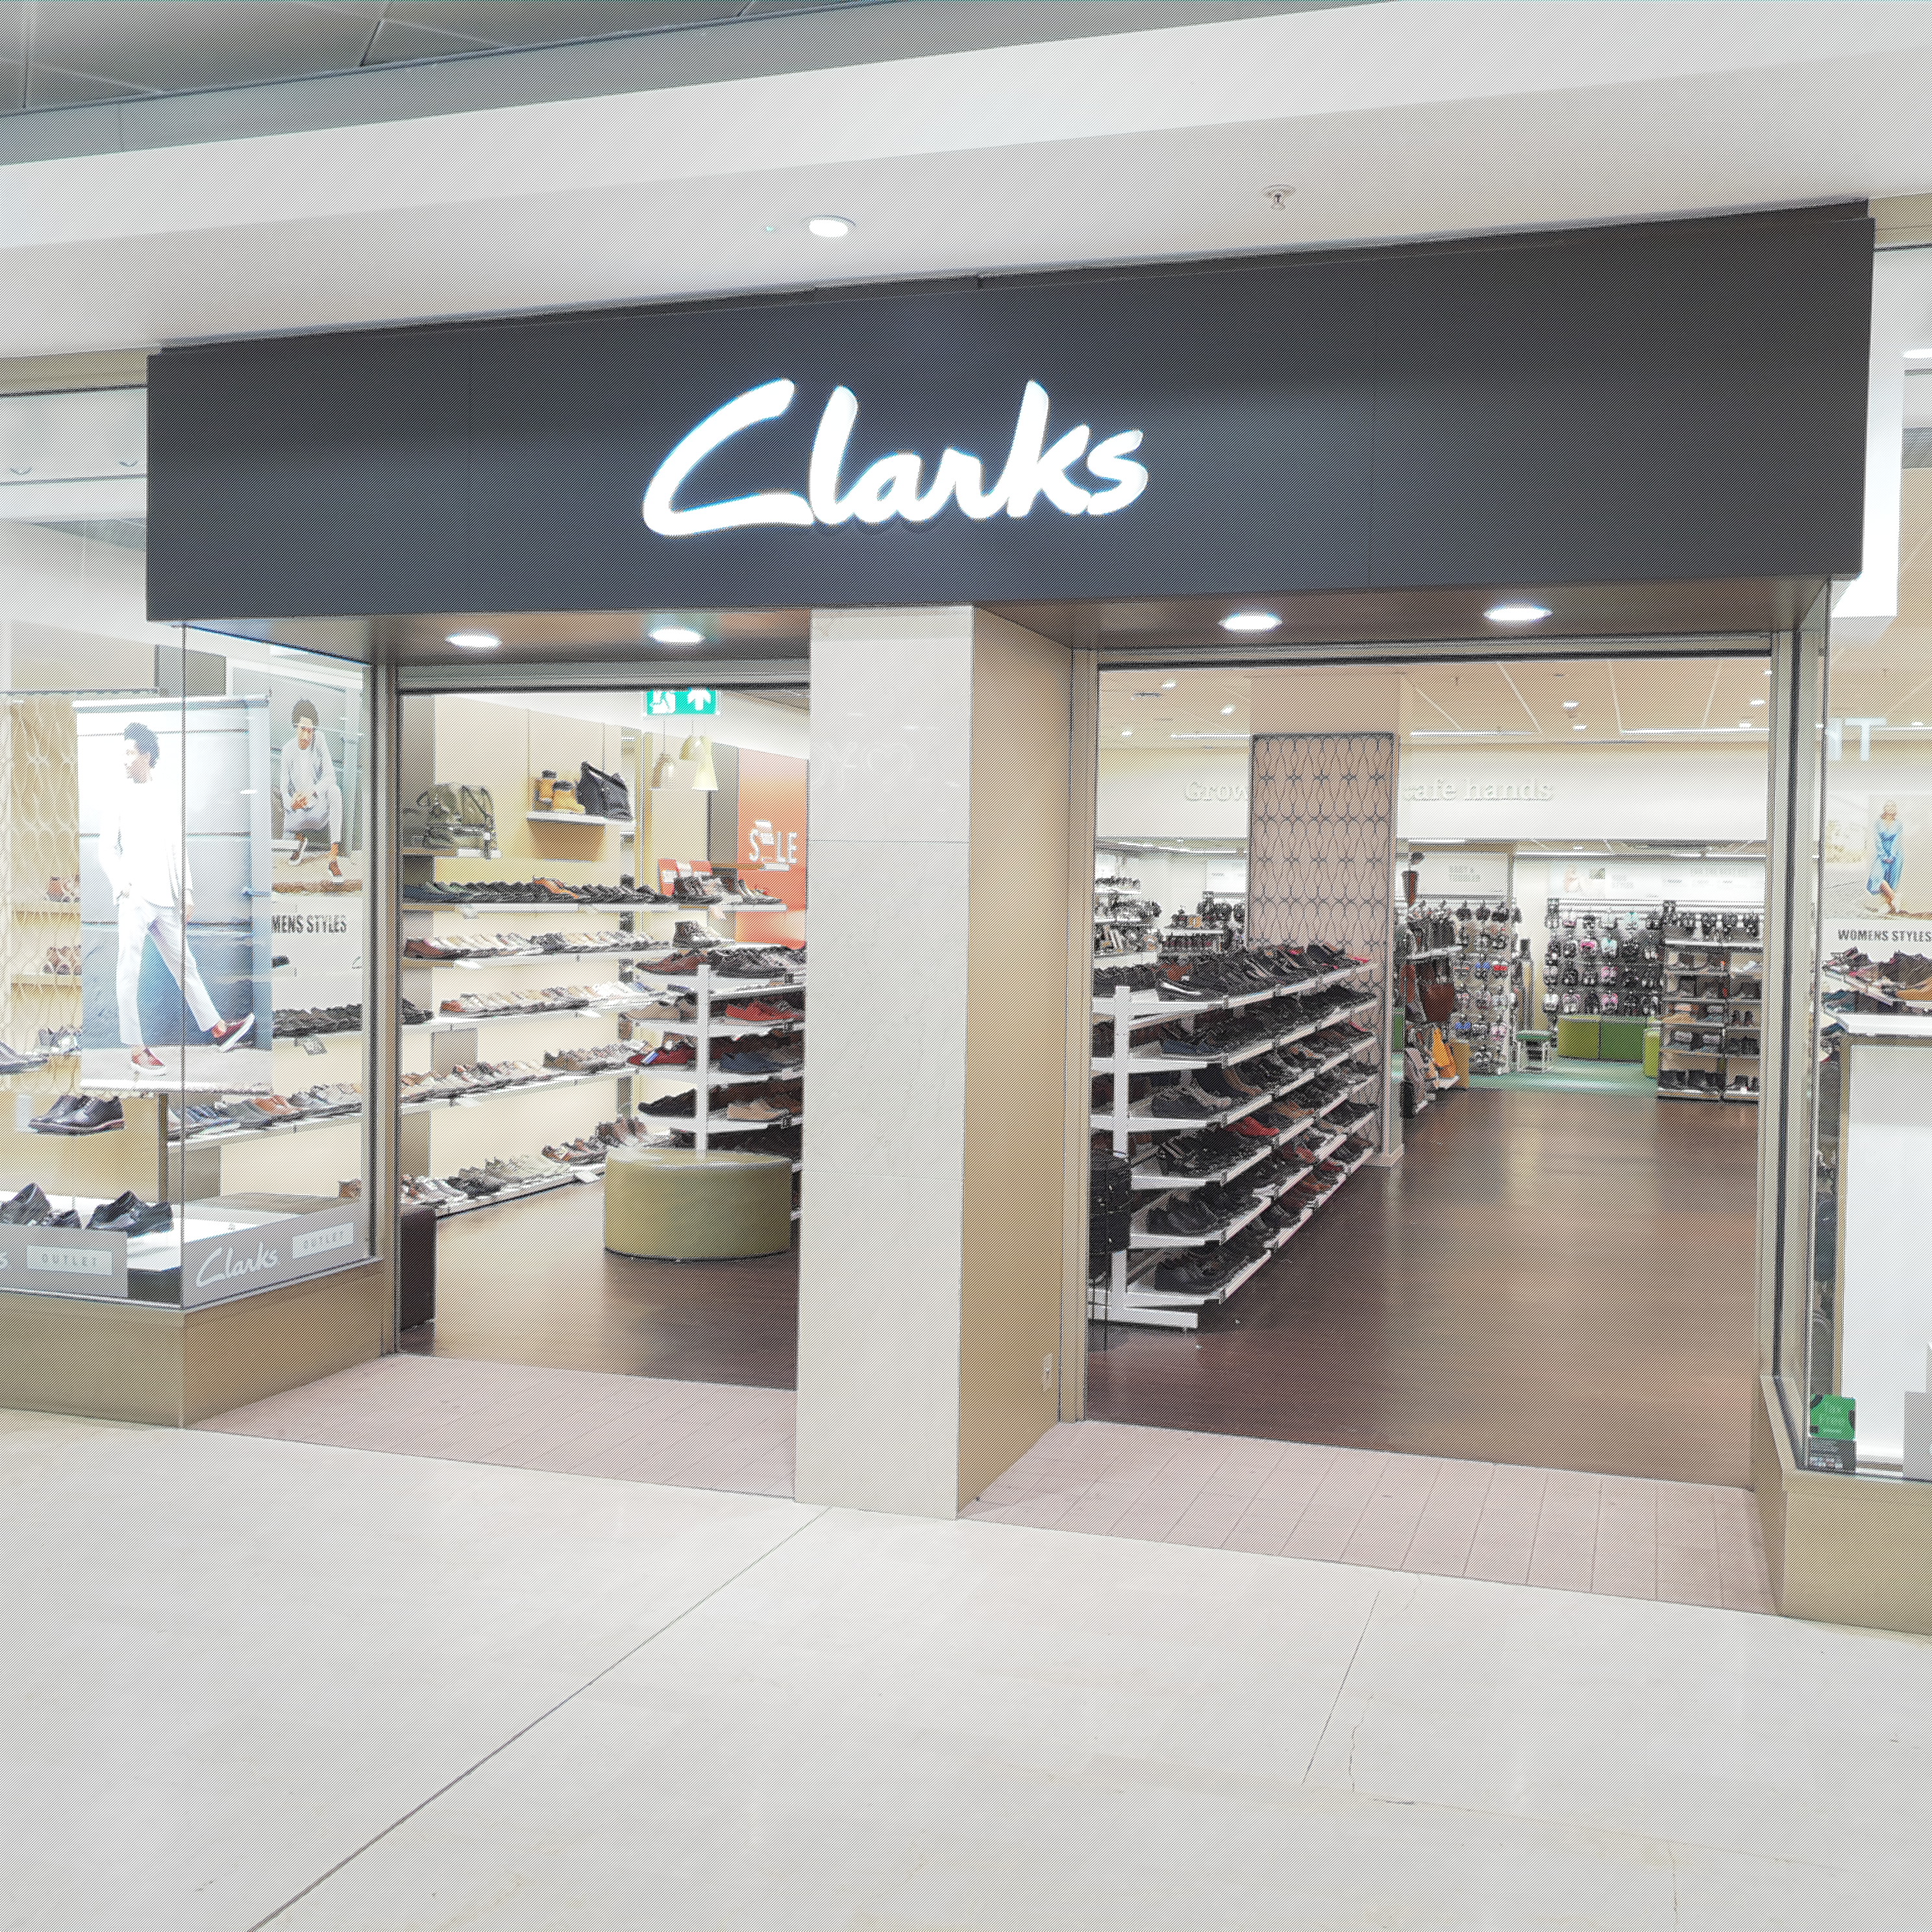 clarks outlet ma